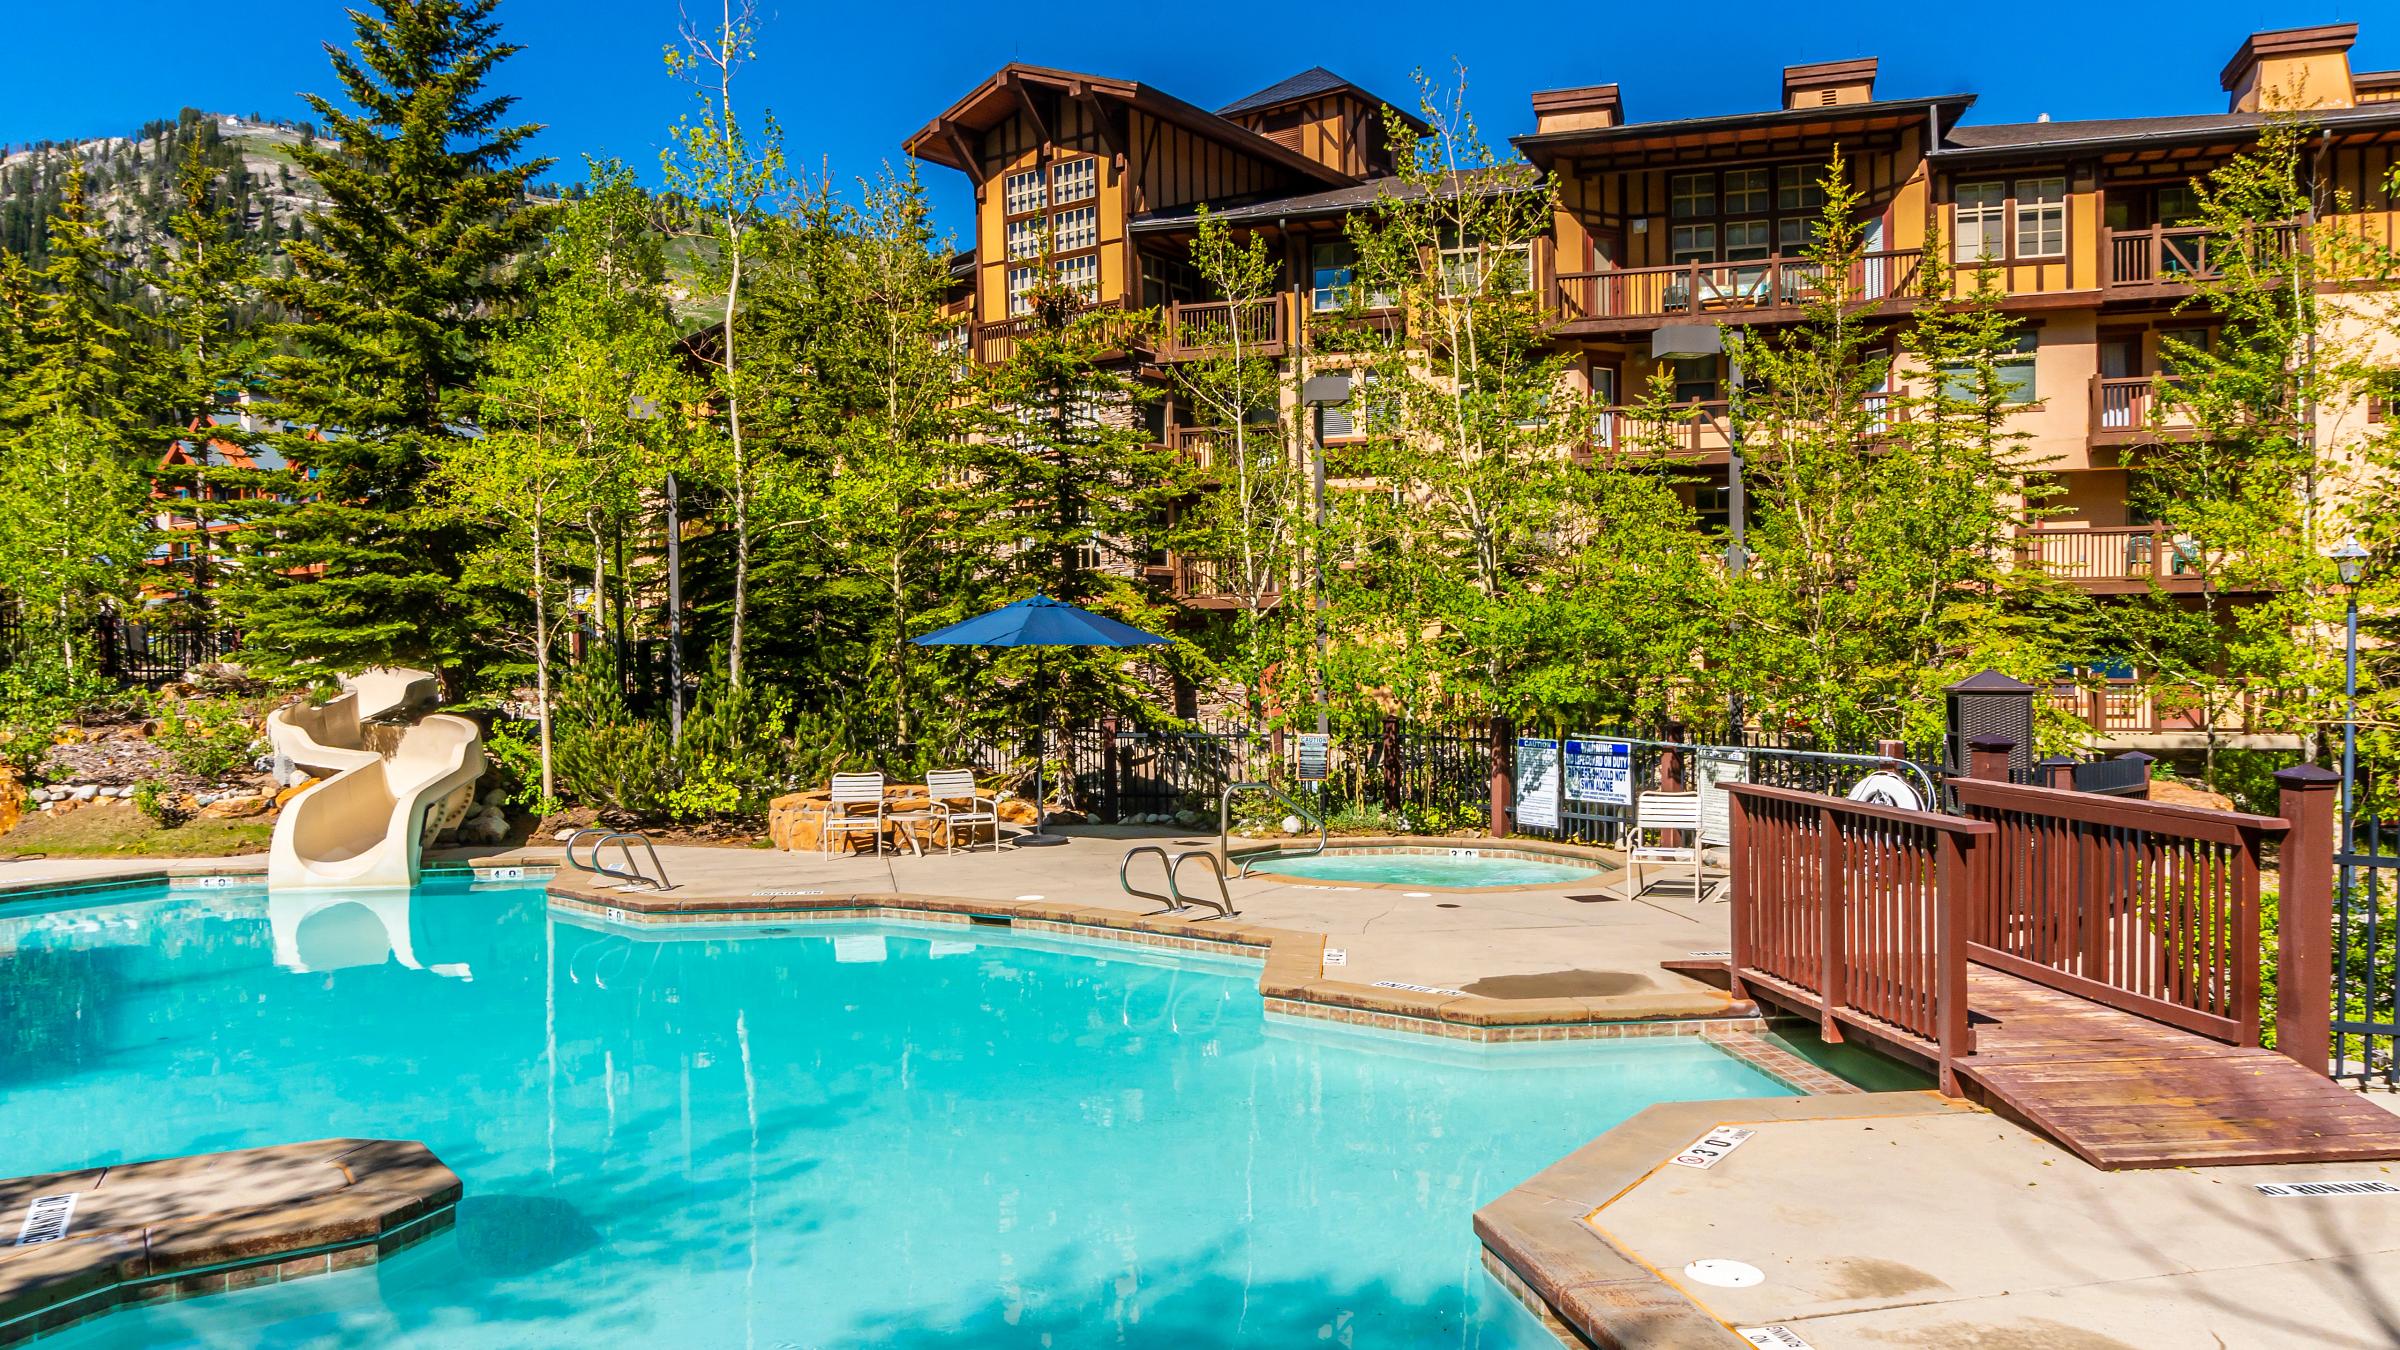 Outdoor pool, hot tub, and water slide at Solitude Mountain Resort